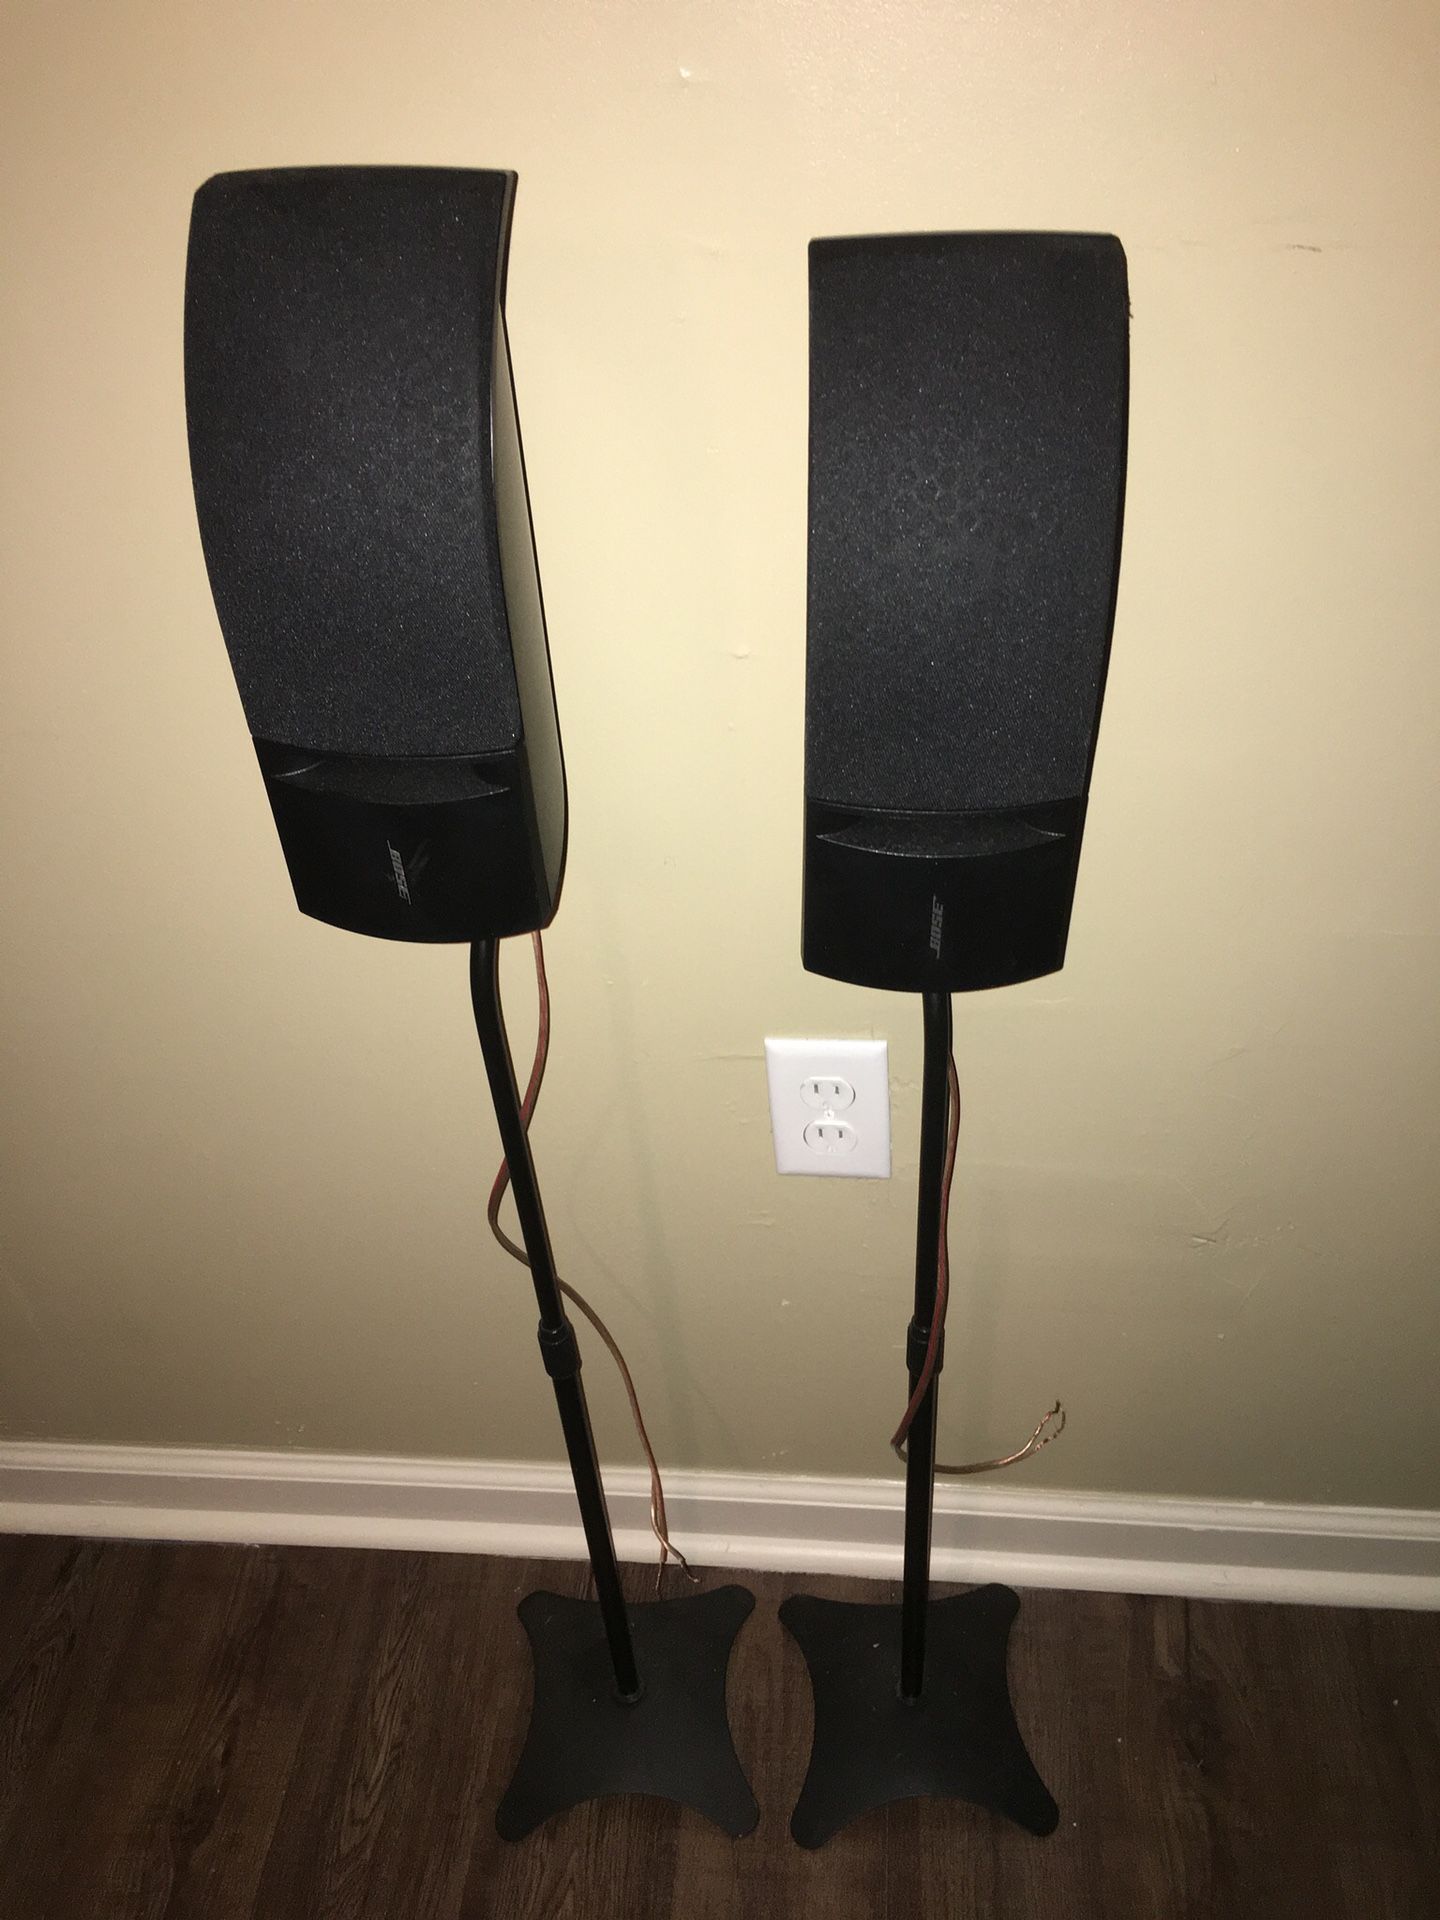 Bose 161 Speakers with Stands